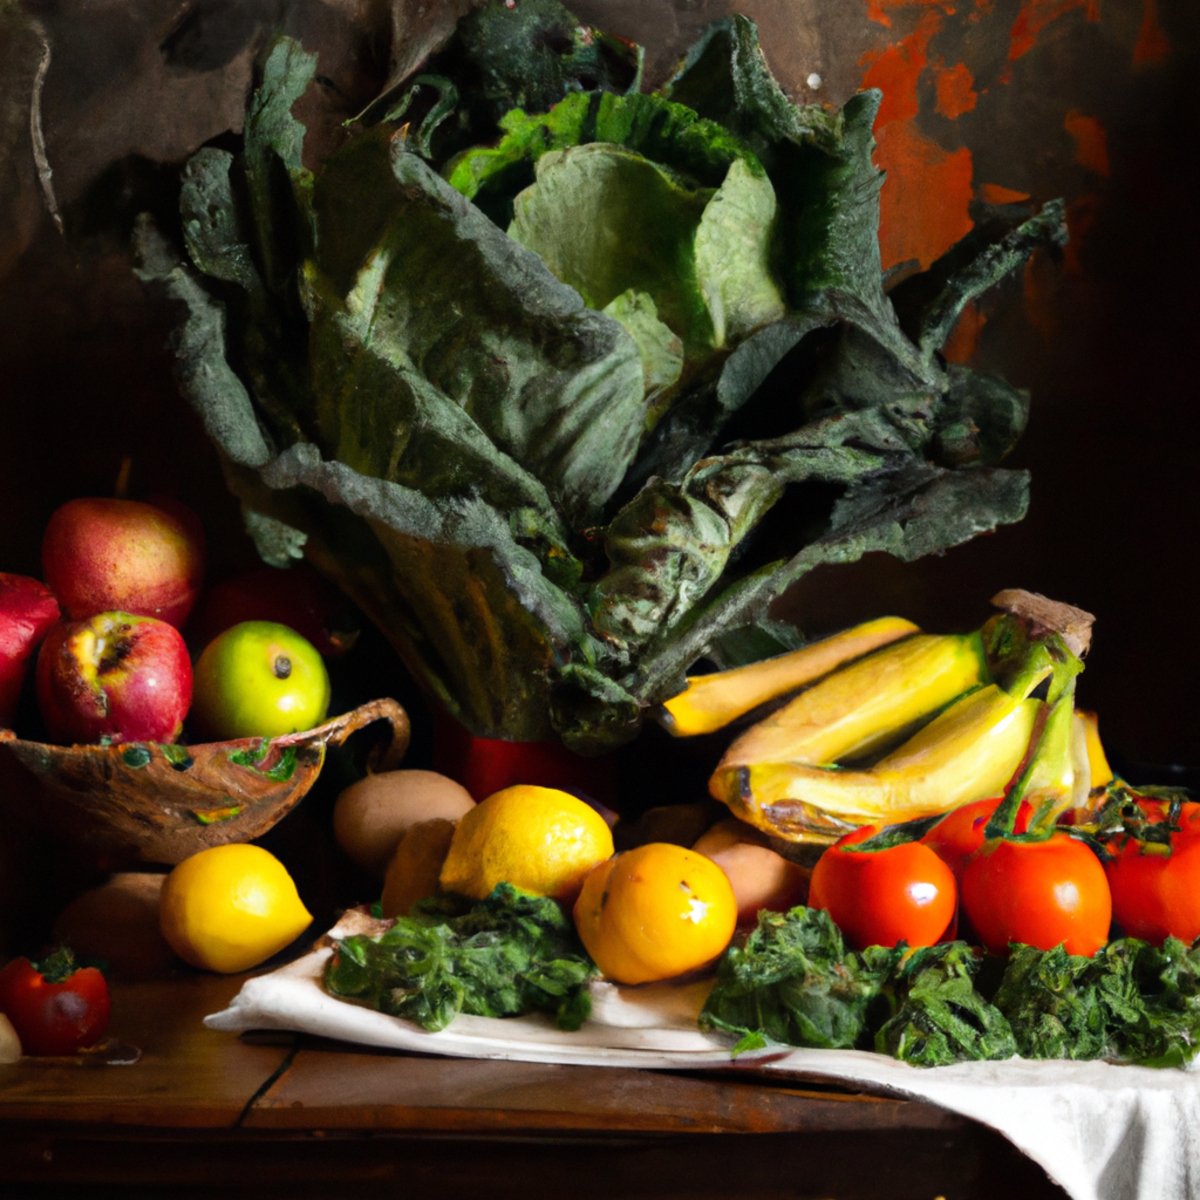 The photo captures a rustic wooden table adorned with an array of colorful fruits and vegetables. A basket of plump red tomatoes sits next to a bundle of leafy green kale, while a pile of vibrant oranges and lemons adds a pop of citrusy brightness. A bowl of crisp apples and pears sits alongside a bunch of ripe bananas, and a cluster of deep purple grapes completes the scene. The natural textures and hues of the produce are highlighted by the soft, natural lighting, making the viewer's mouth water at the thought of the delicious and nutritious meal that could be made from these fresh ingredients.